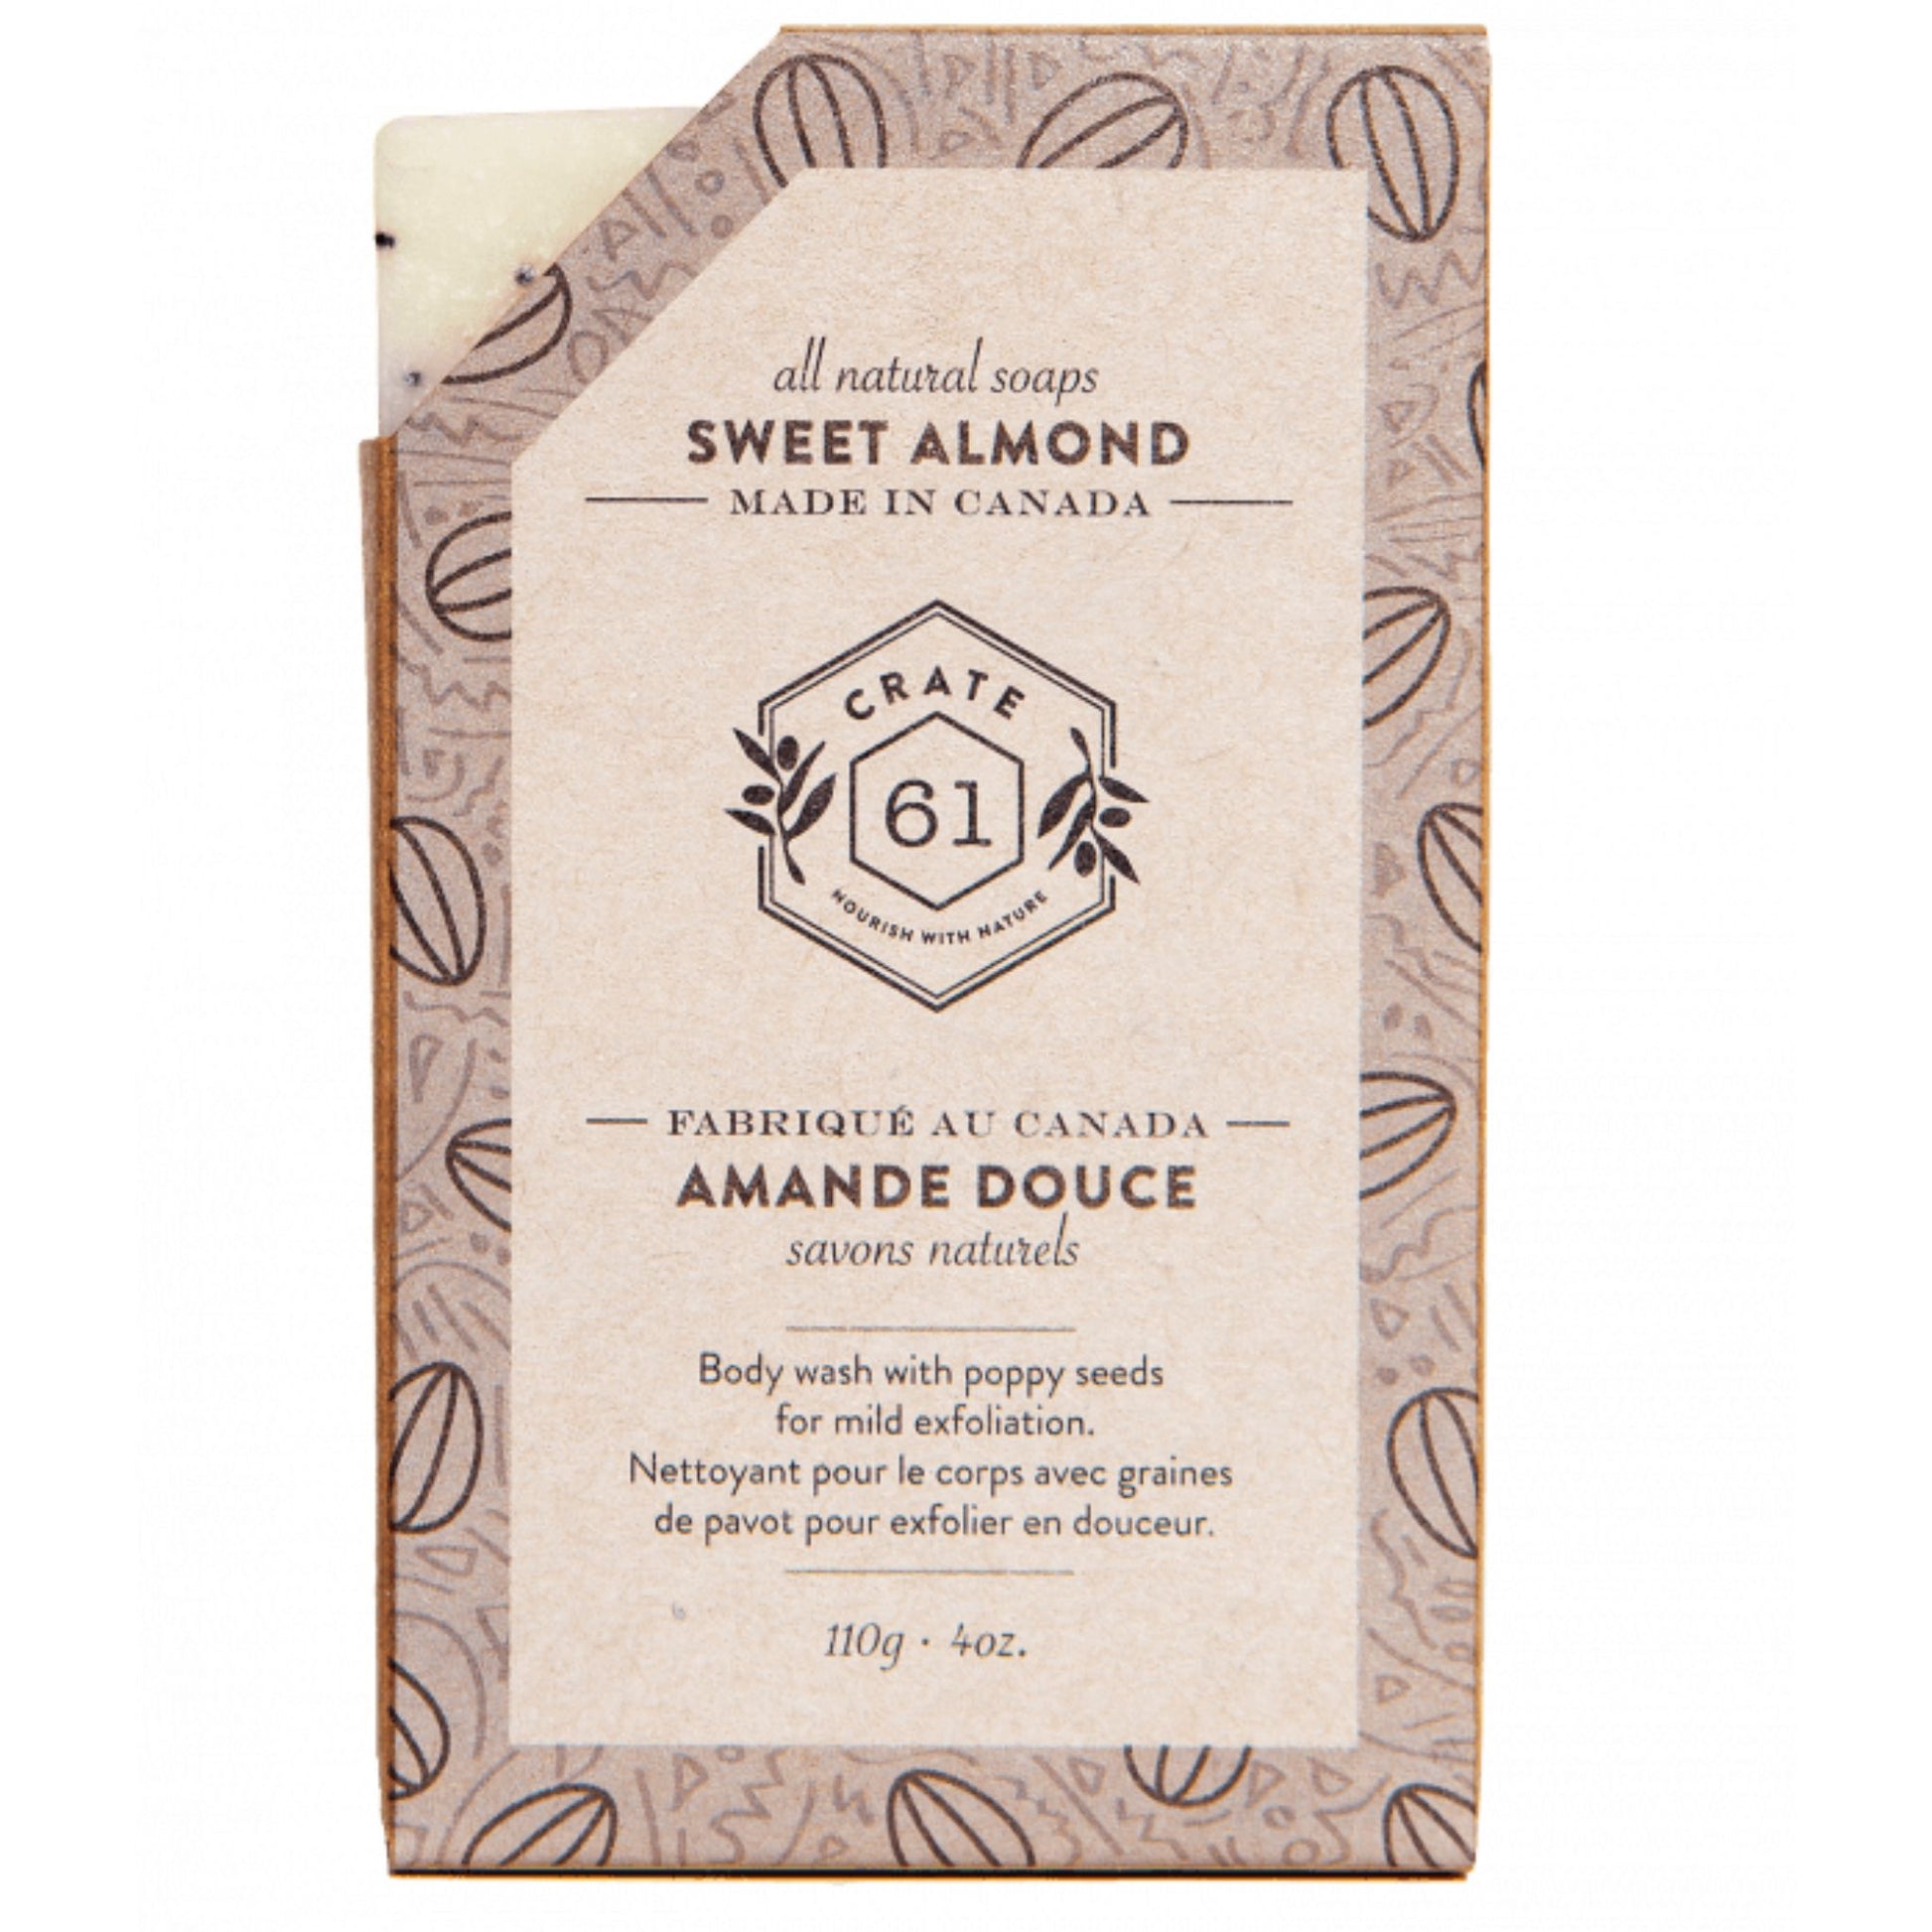 crate-61-soap-sweet-almond-110g